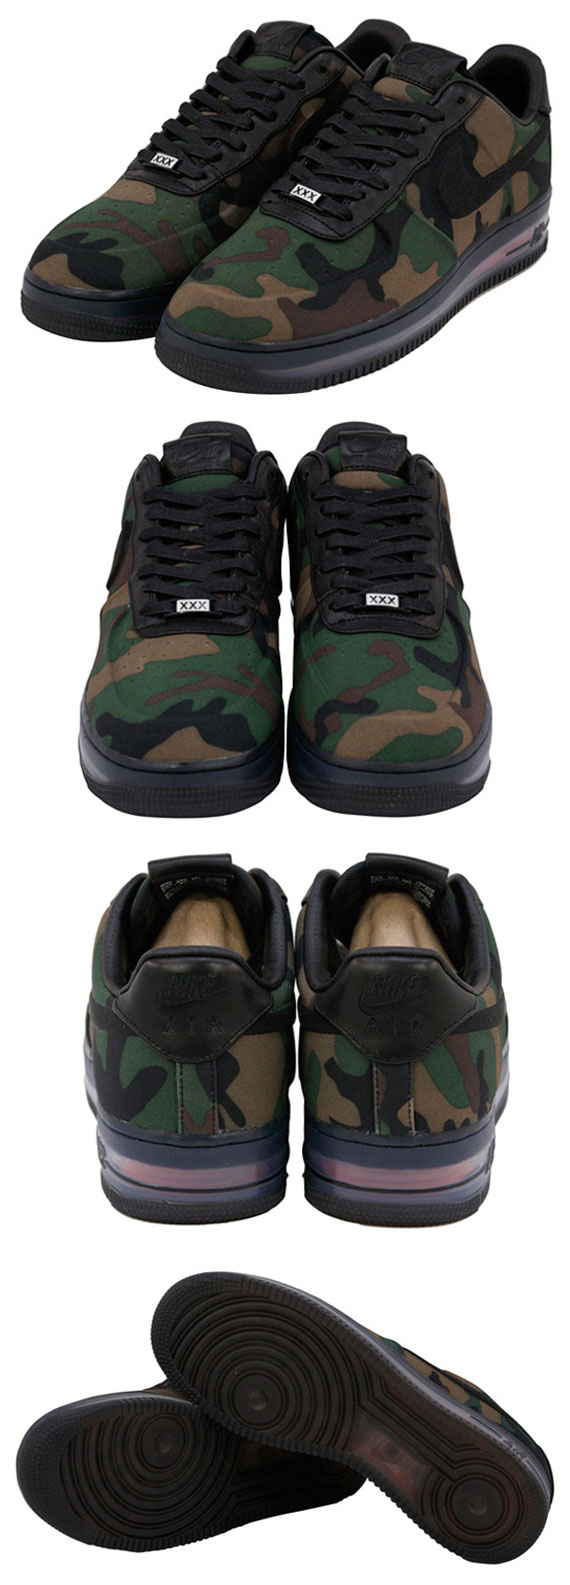 Nike Air Force 1 Low Max Air Vt Camo New Images 2